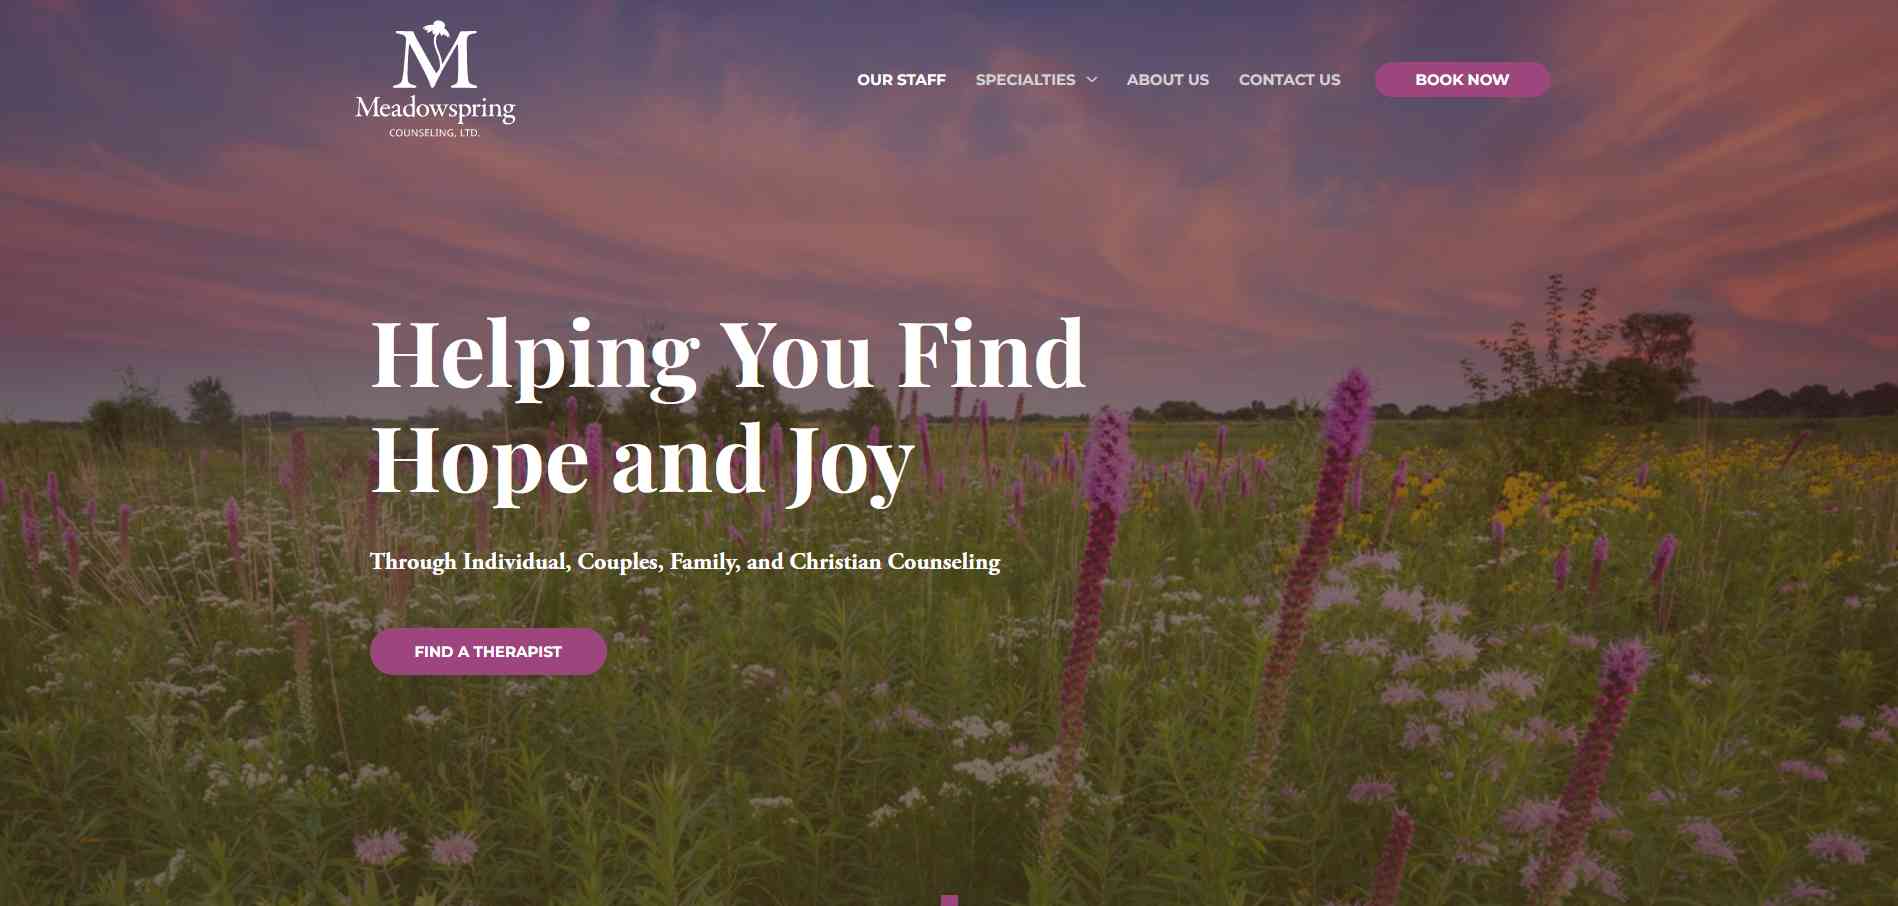 Meadowspring Counseling website homempage